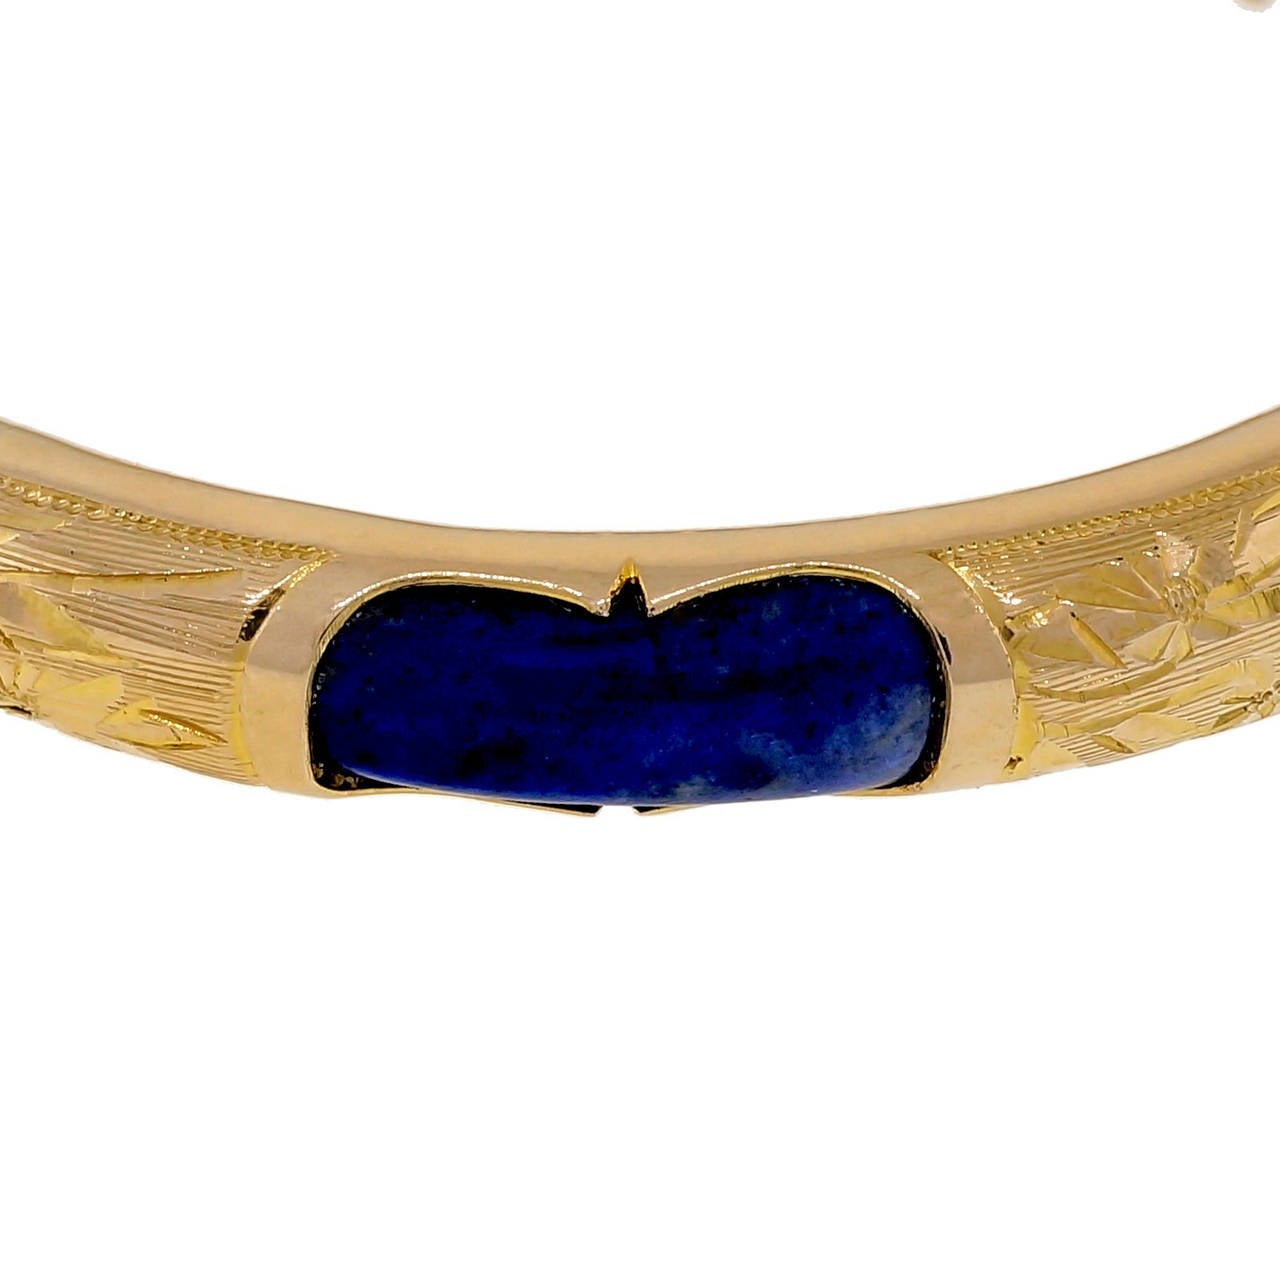 Handmade Lapis 14k yellow gold bangle bracelet. Natural untreated bright blue Lapis with Iron Pyrite. Secure catch hinge. Hand engraved between Lapis sections.

6 bright blue Lapis, 16.64 x 6.20mm, blue, natural untreated with iron Pyrite
14k yellow